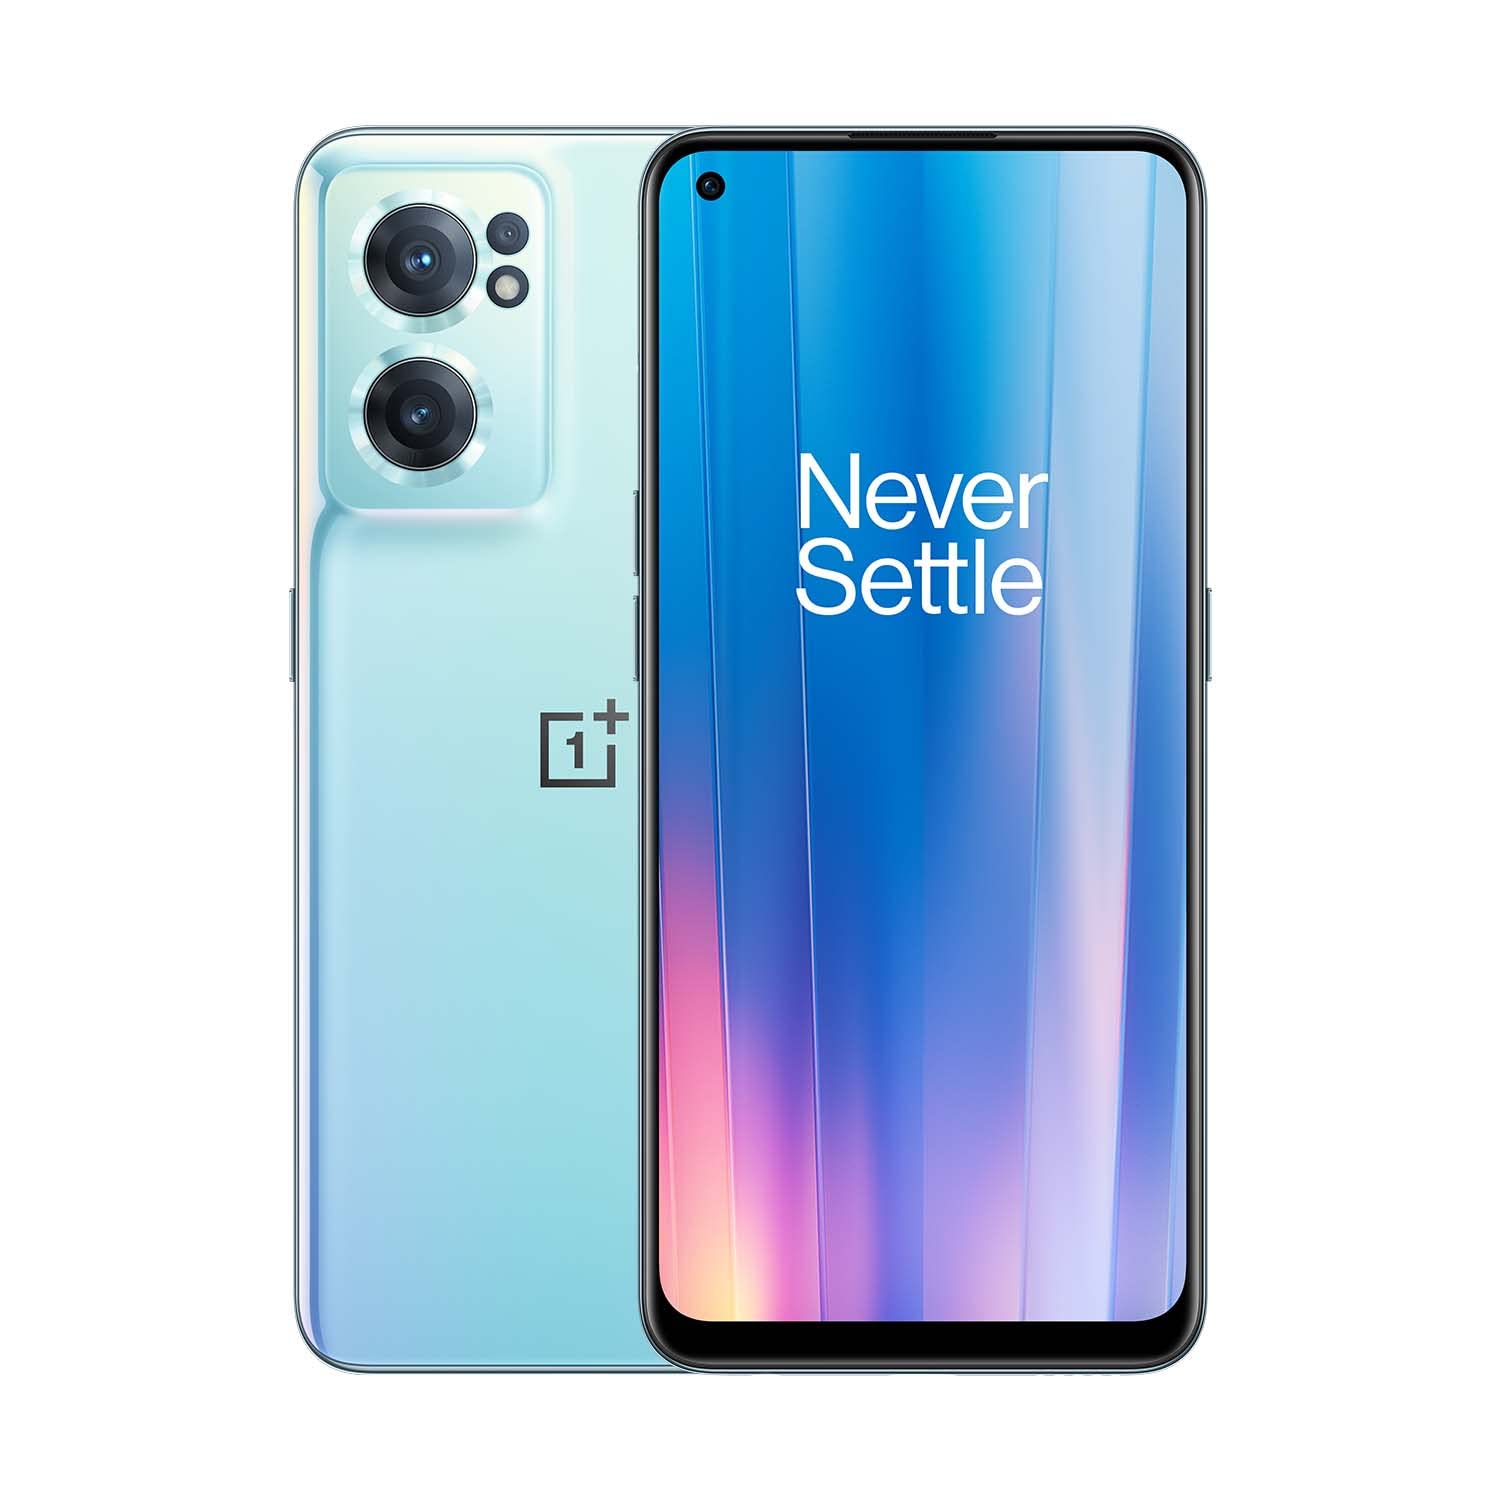 Buy OnePlus Nord CE 2 5G (Bahamas Blue, 6GB RAM, 128GB Storage) + Flat Rs.2,000 Off on SBI Cards